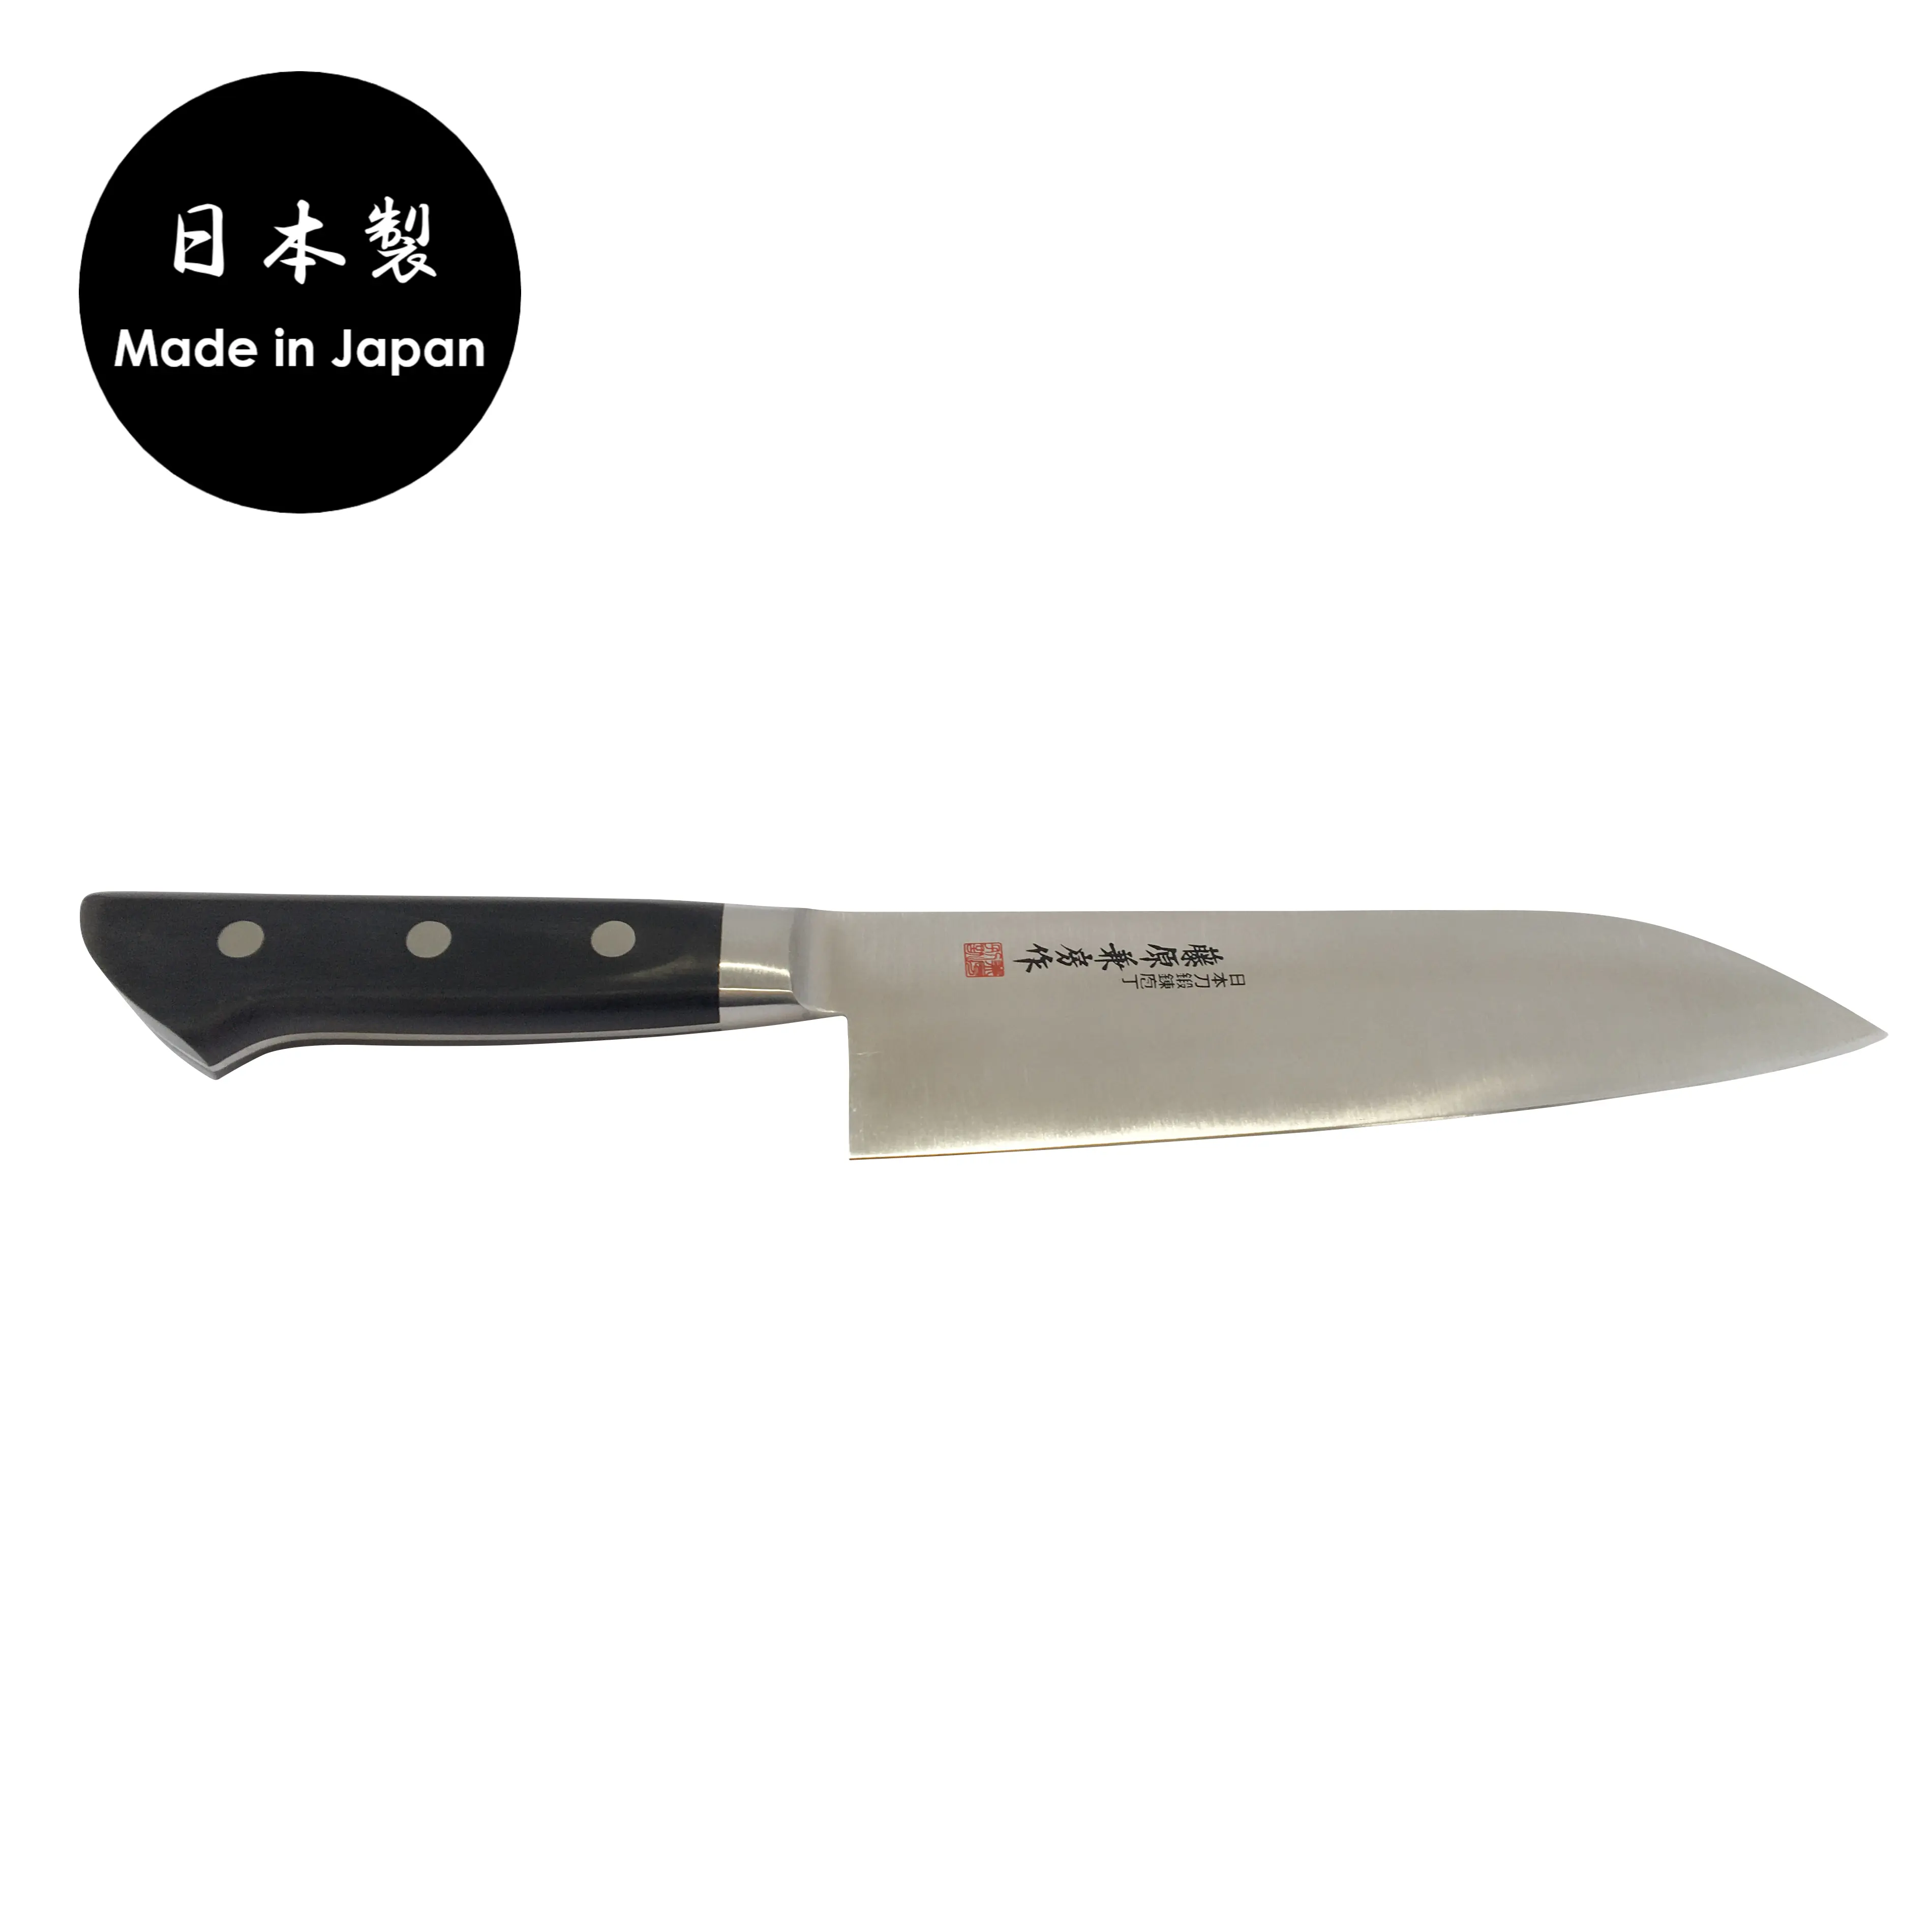 AUS-8 Molybdenum steel very high quality Japanese kitchen knife made in Japan